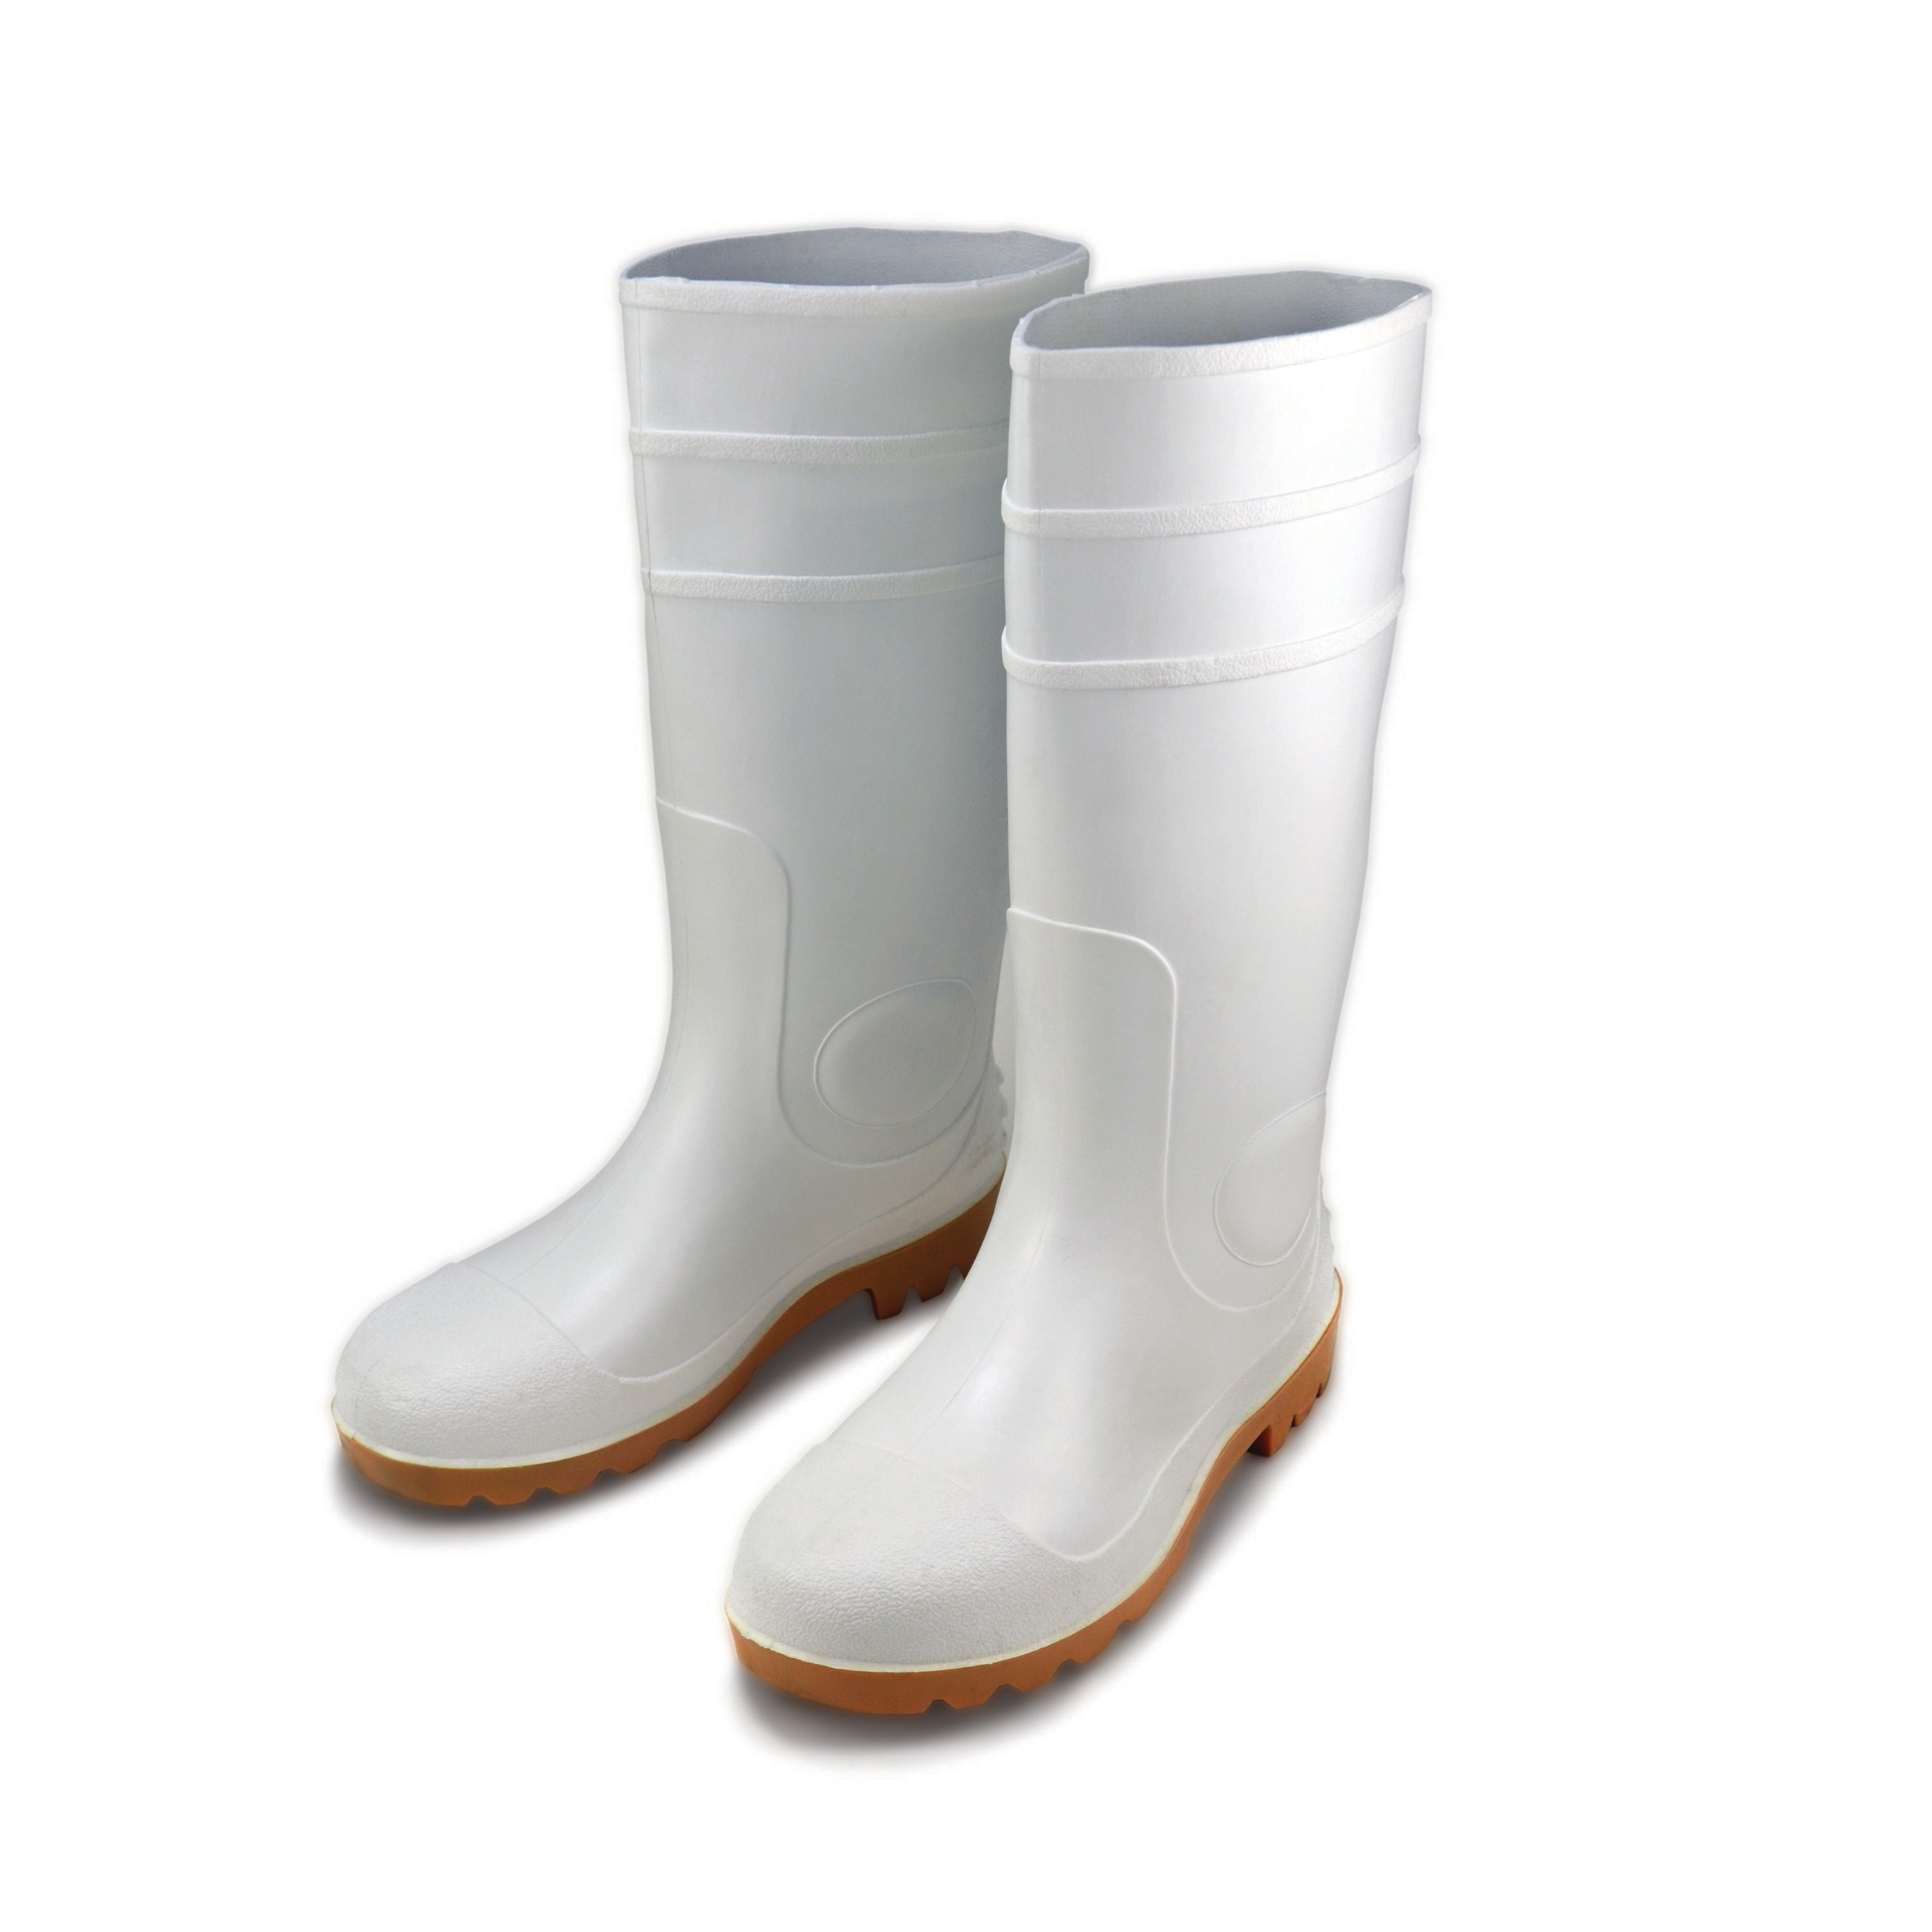 West Chester Mens White Waterproof Rubber Boots Size: 9 Medium in